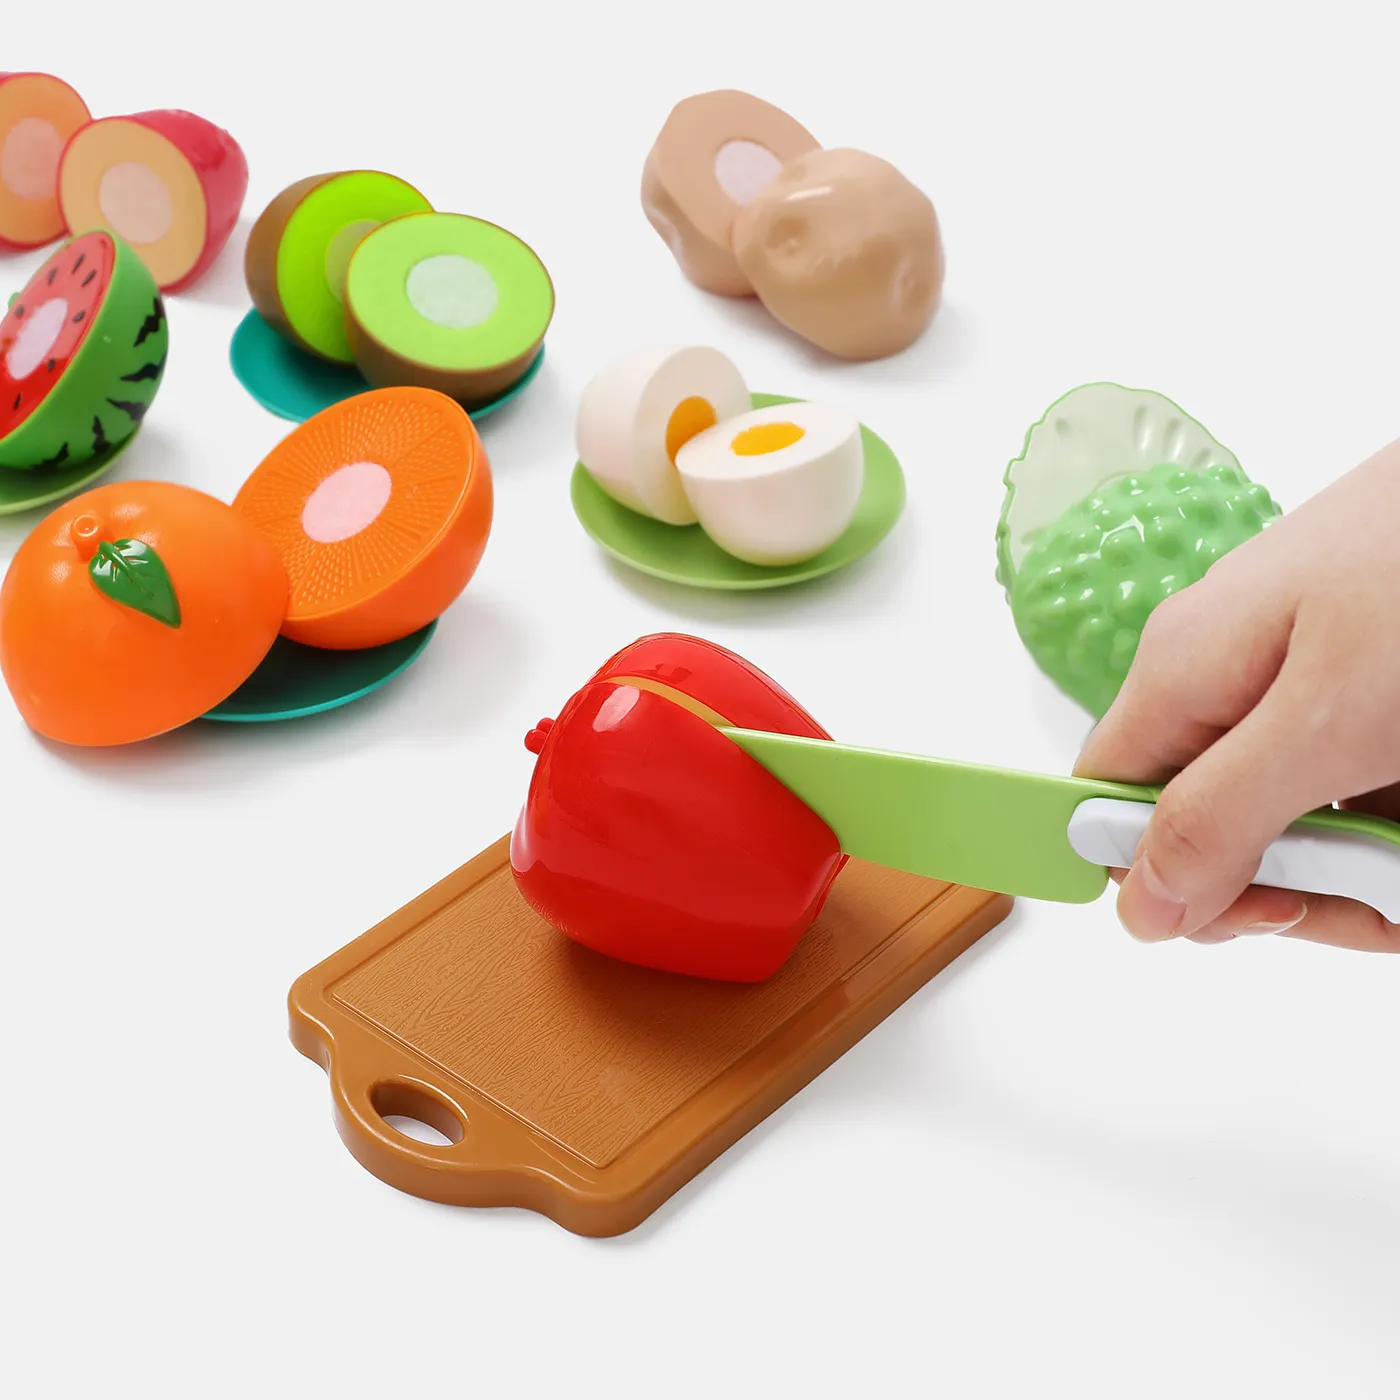 16Pcs BPA Free Plastic Cutting Play Food Toy Kids Cuttable Fruits Vegetables Set with Knives & Cutti